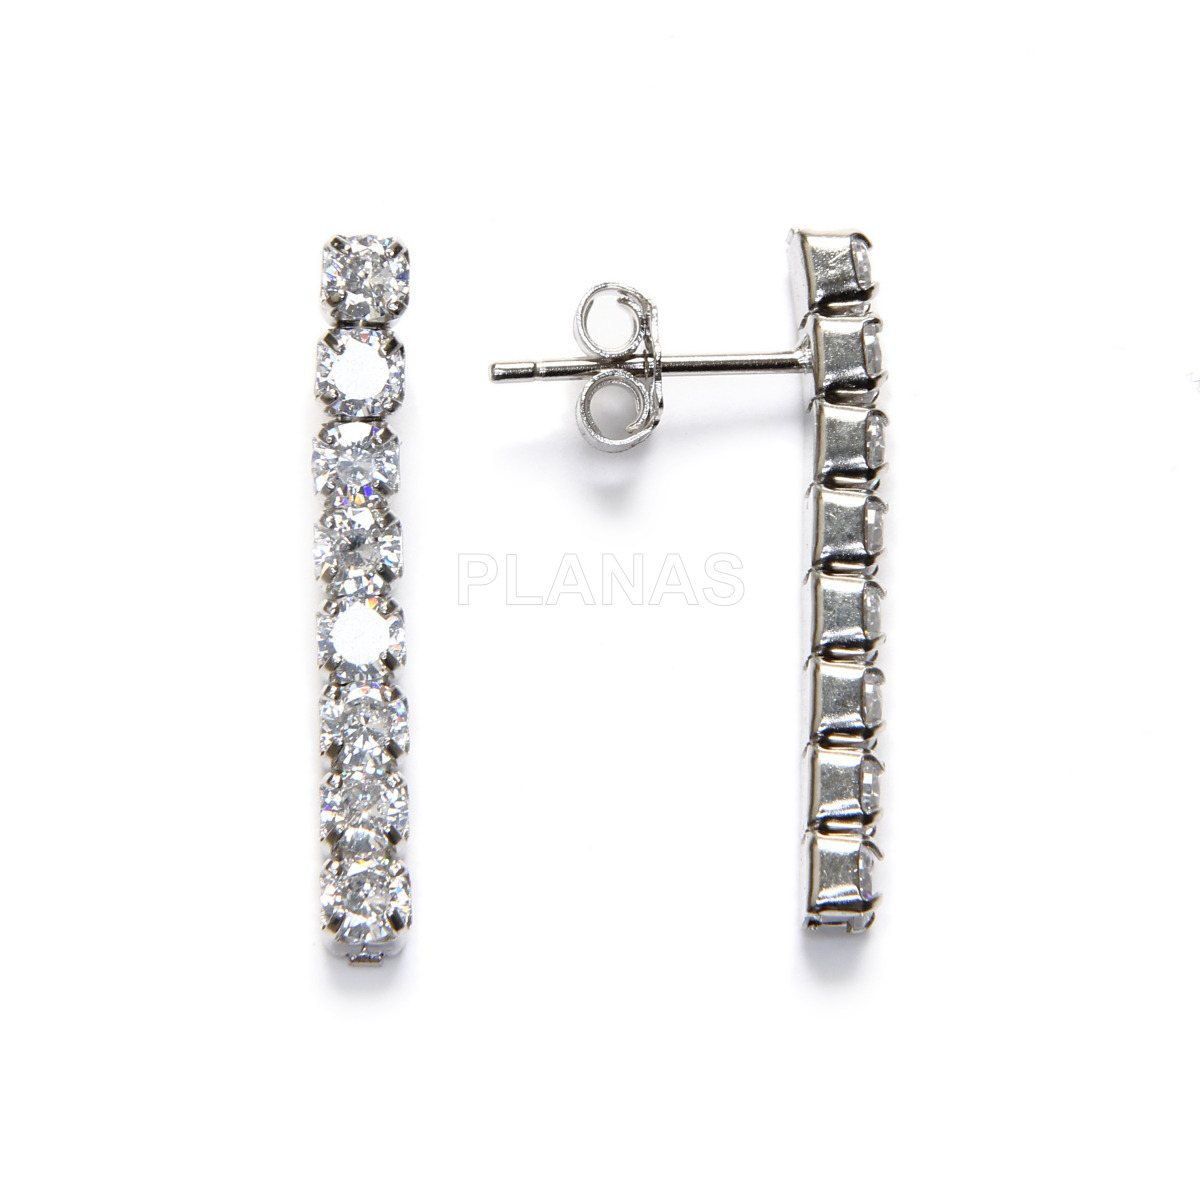 Rhodium plated sterling silver and white zirconia earrings.